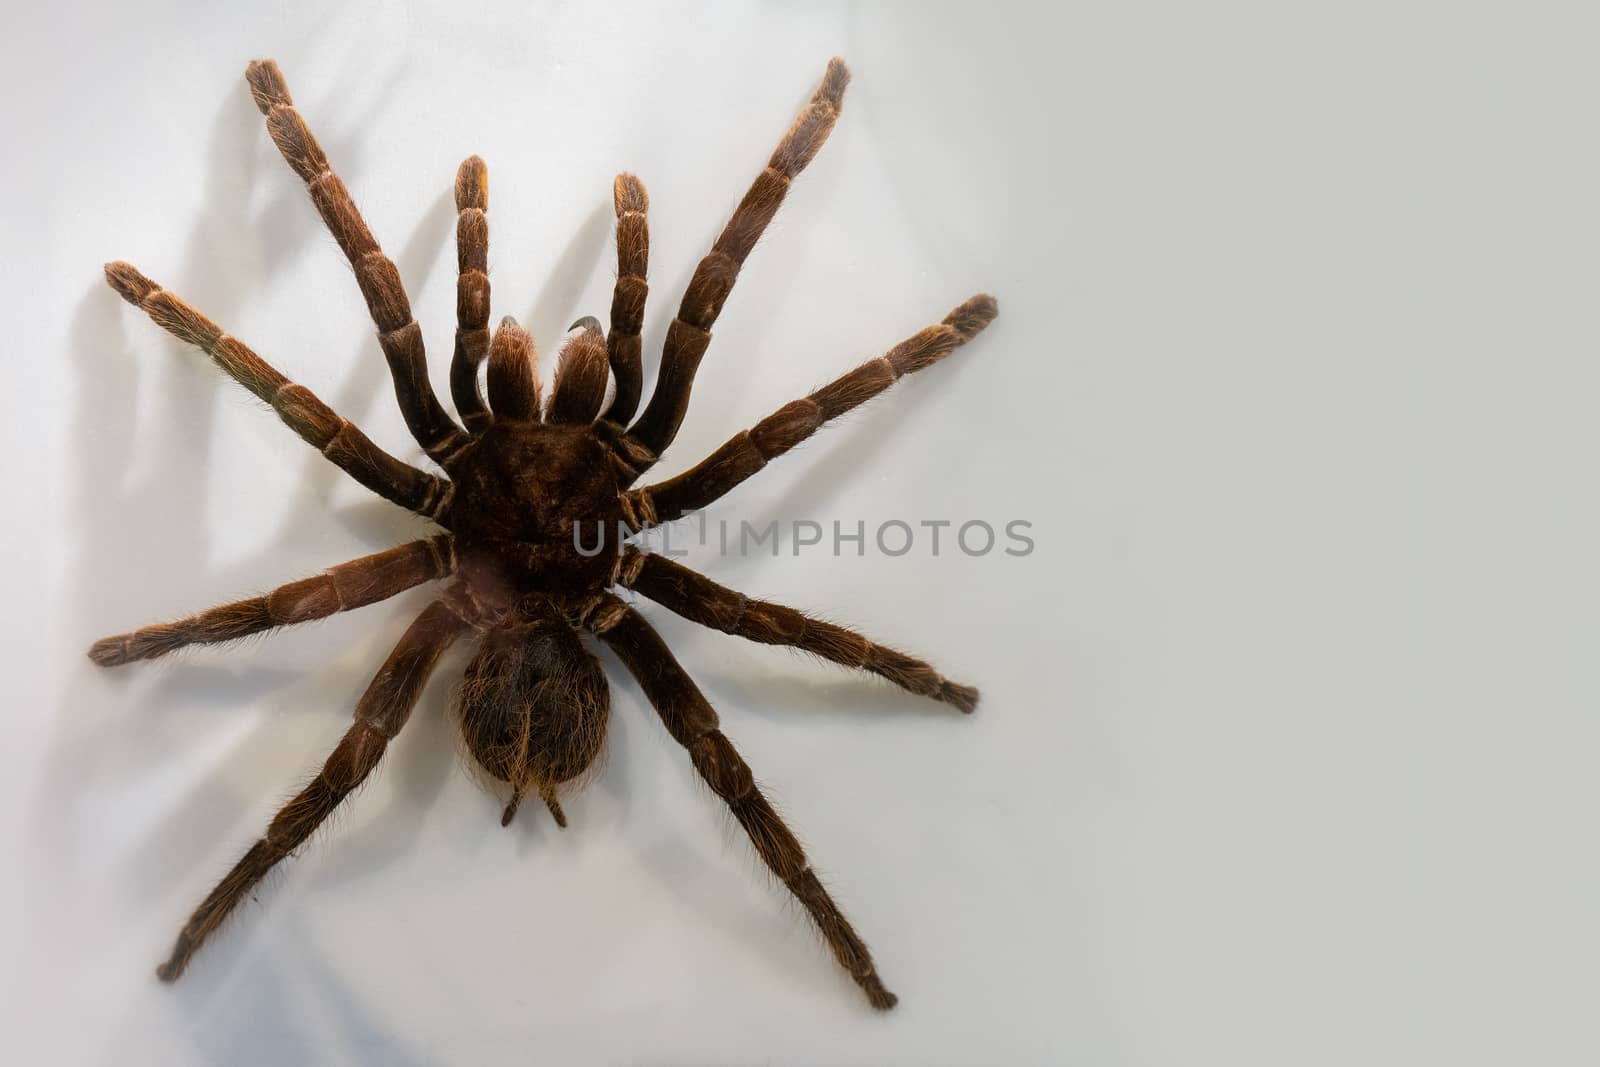 Predatory spider on white background. Large dangerous insect. Fauna of nature.